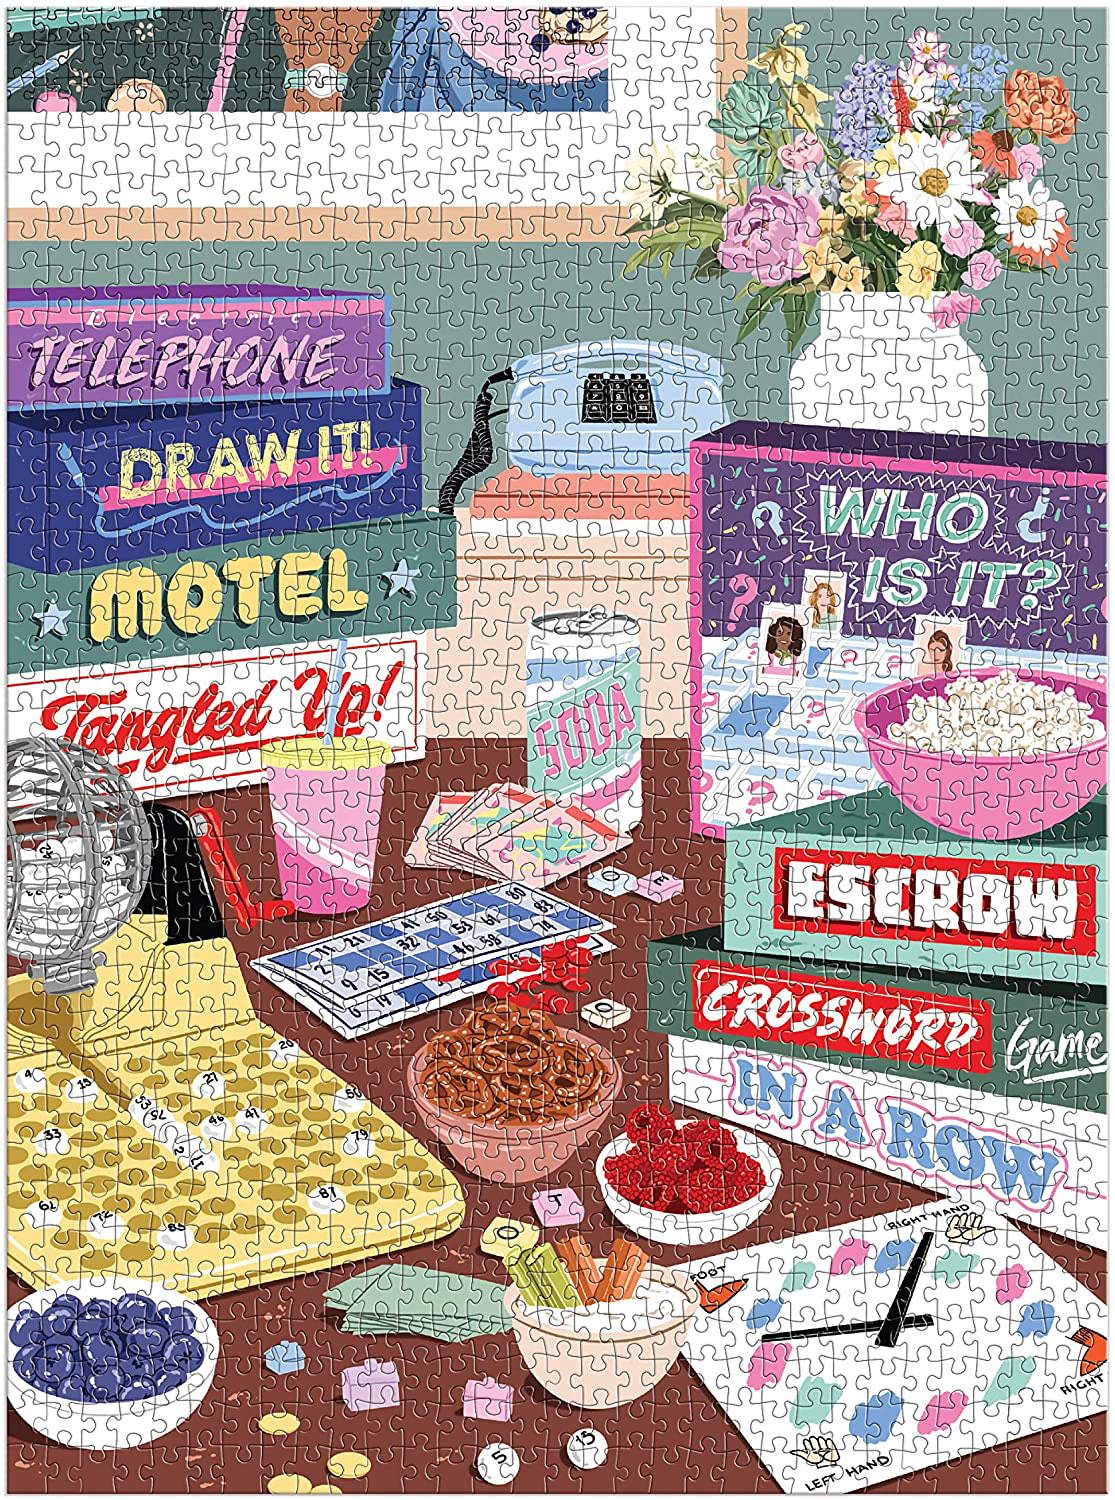 Game Night Food and Drink Jigsaw Puzzle